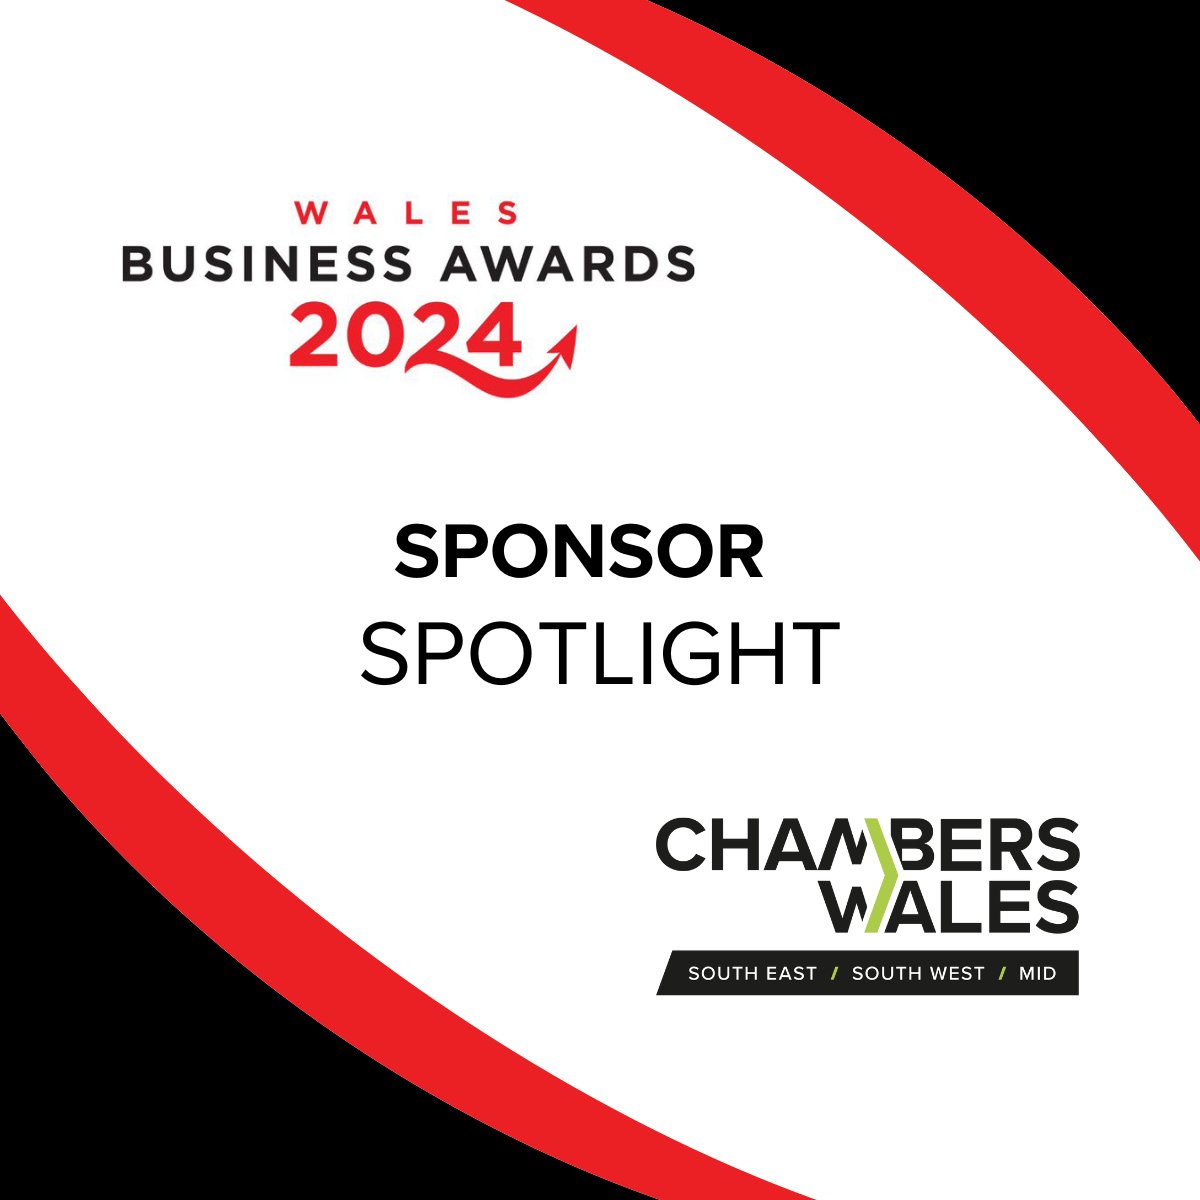 We’re thrilled to be sponsoring the B2B Customer Commitment award at the #WalesBusinessAwards2024: cw-seswm.com/news/introduci…